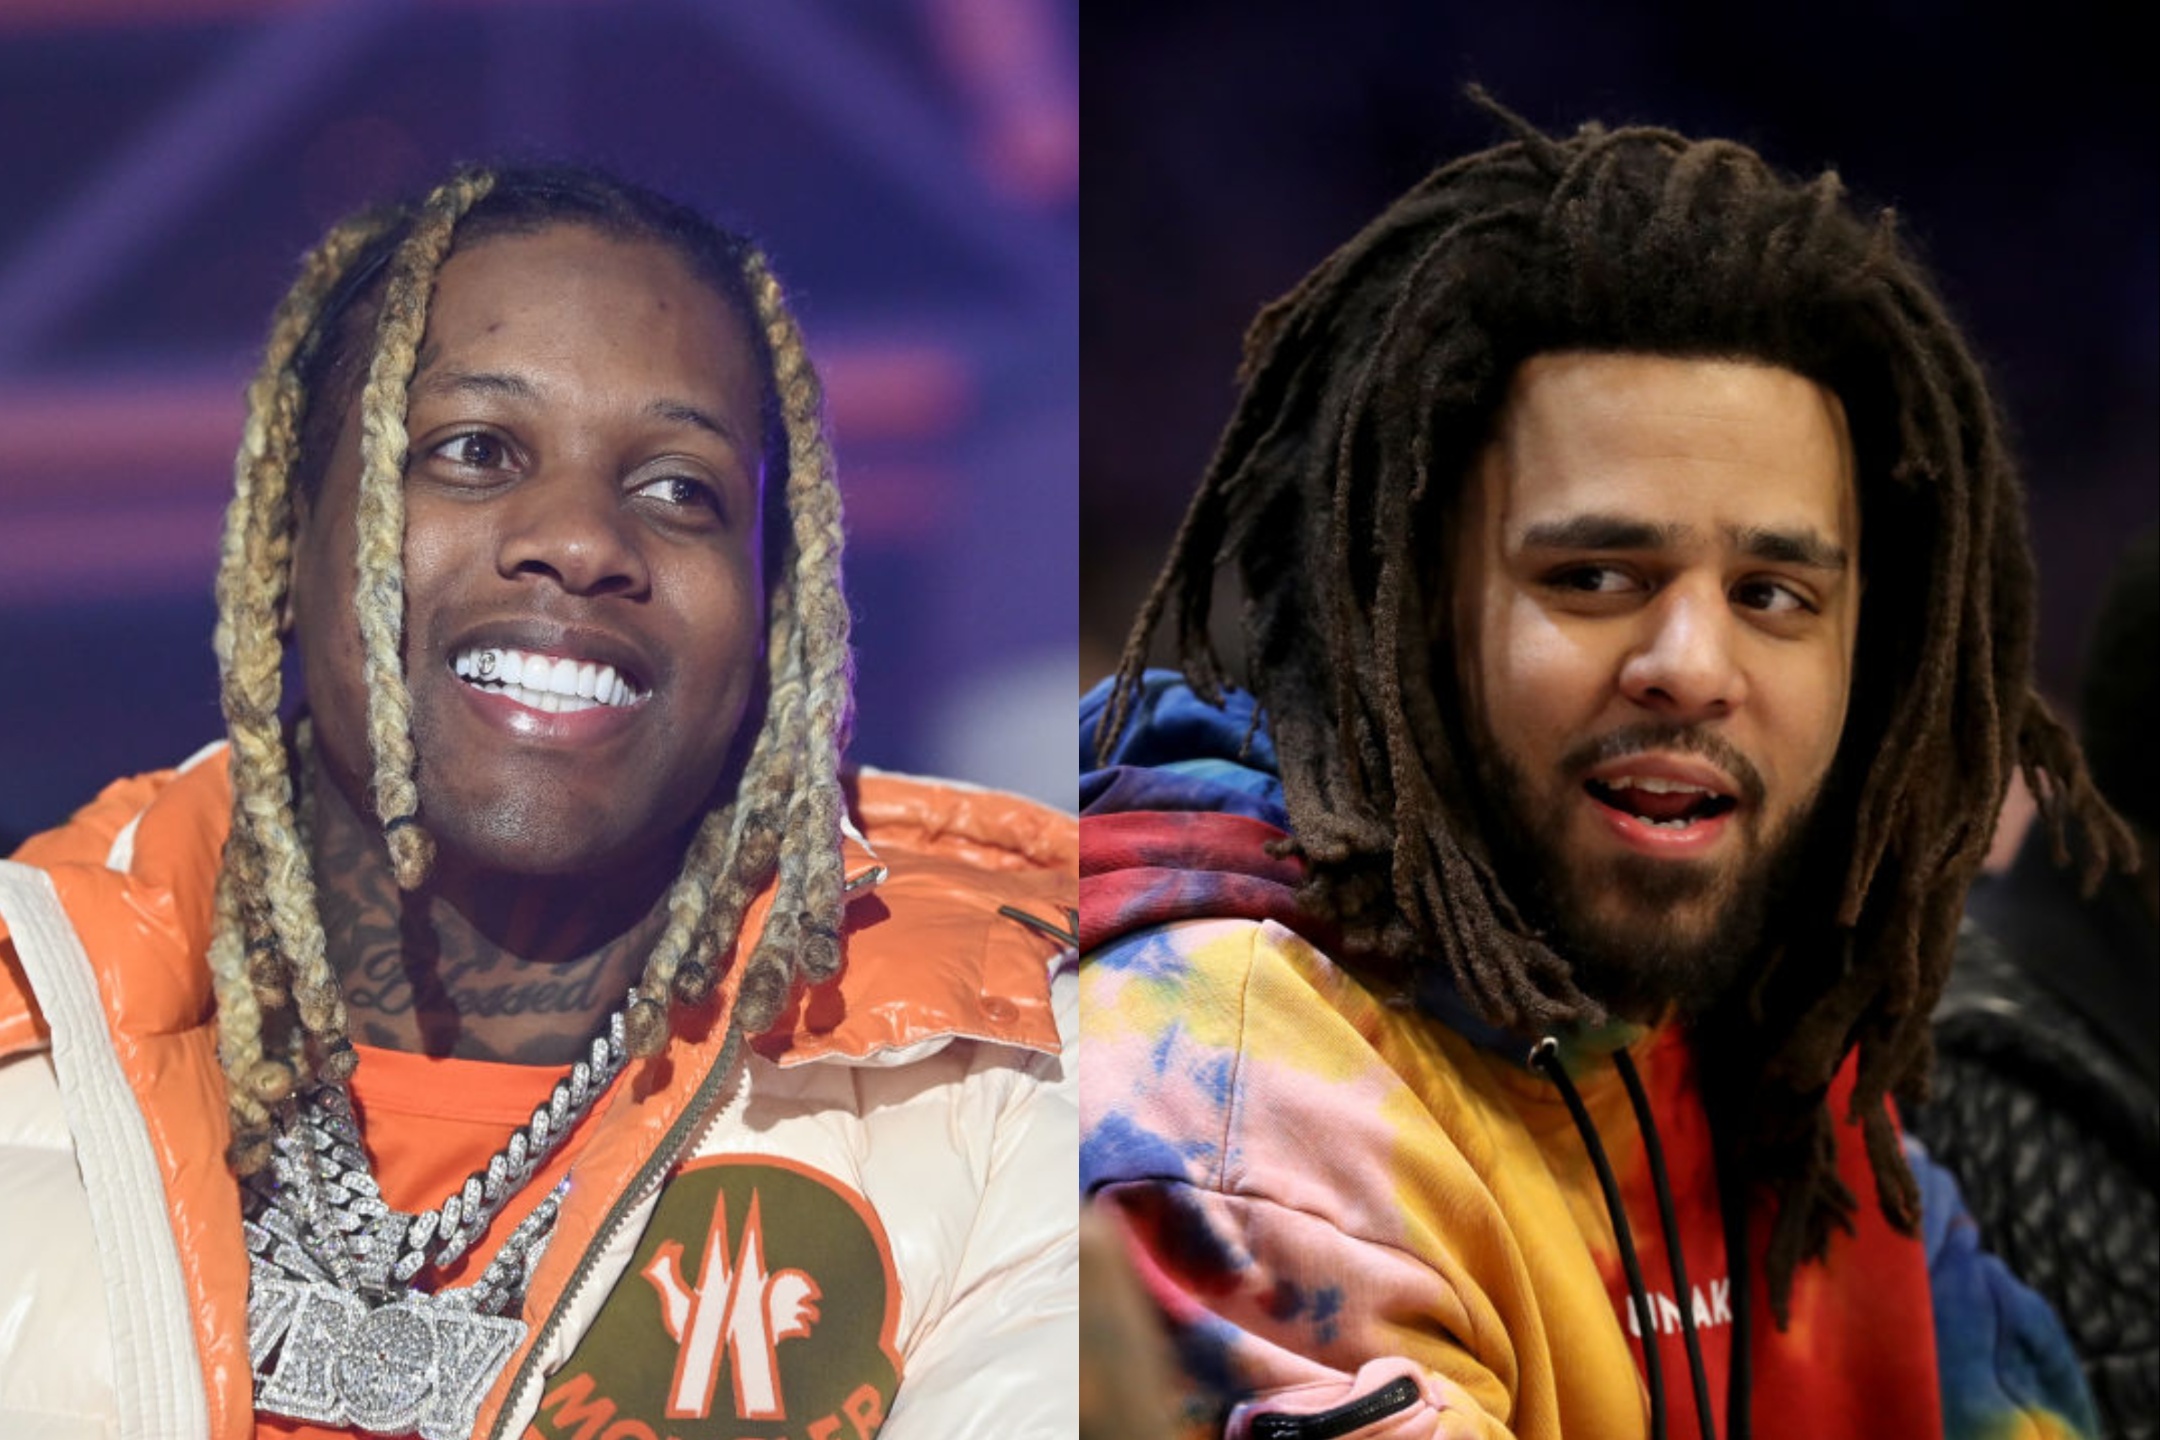 Lil Durk & J. Cole Have A Hit: Twitter Praises “All My Life”